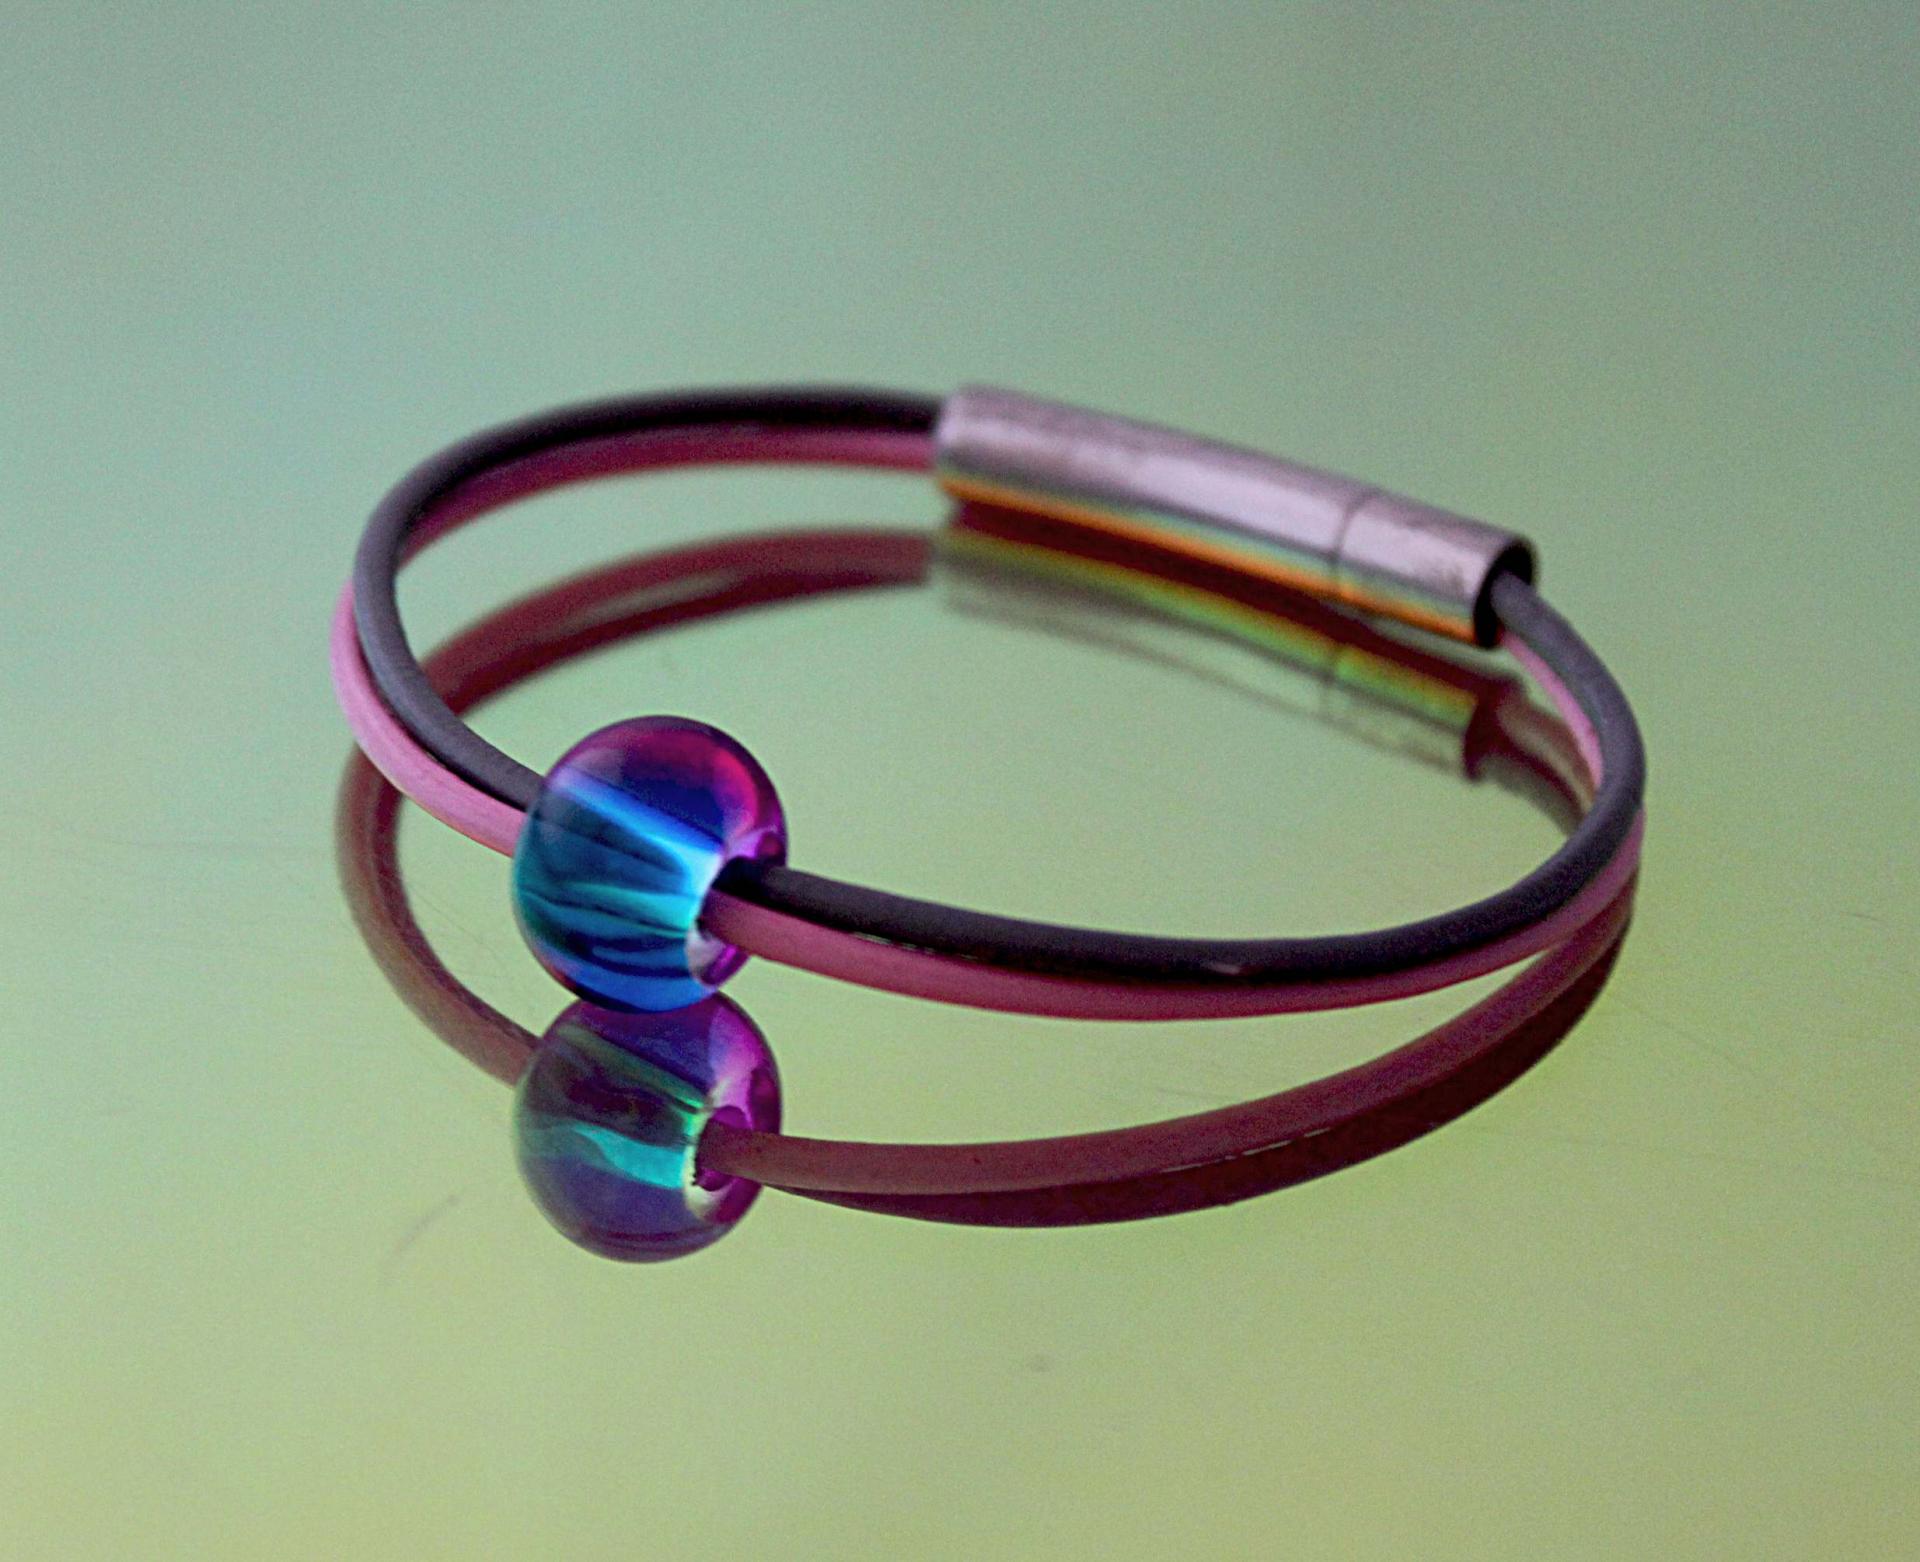 Chic Pink & Grey leather Bracelet with Bright Captive Bead